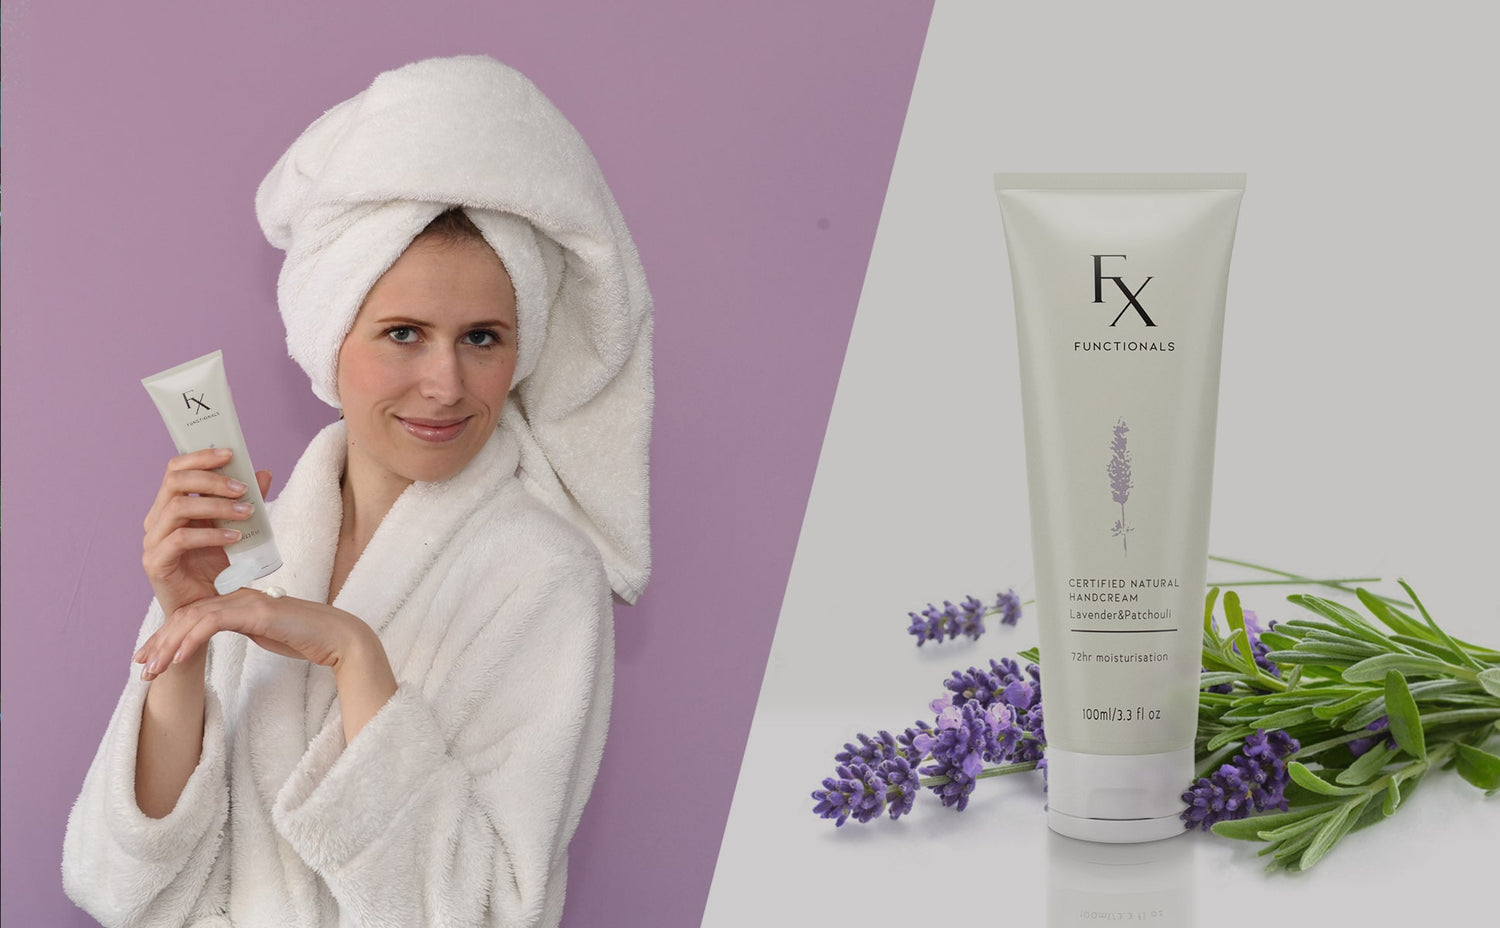 Functionals Handcream bottle with lavender sprigs next to woman holding and using handcream